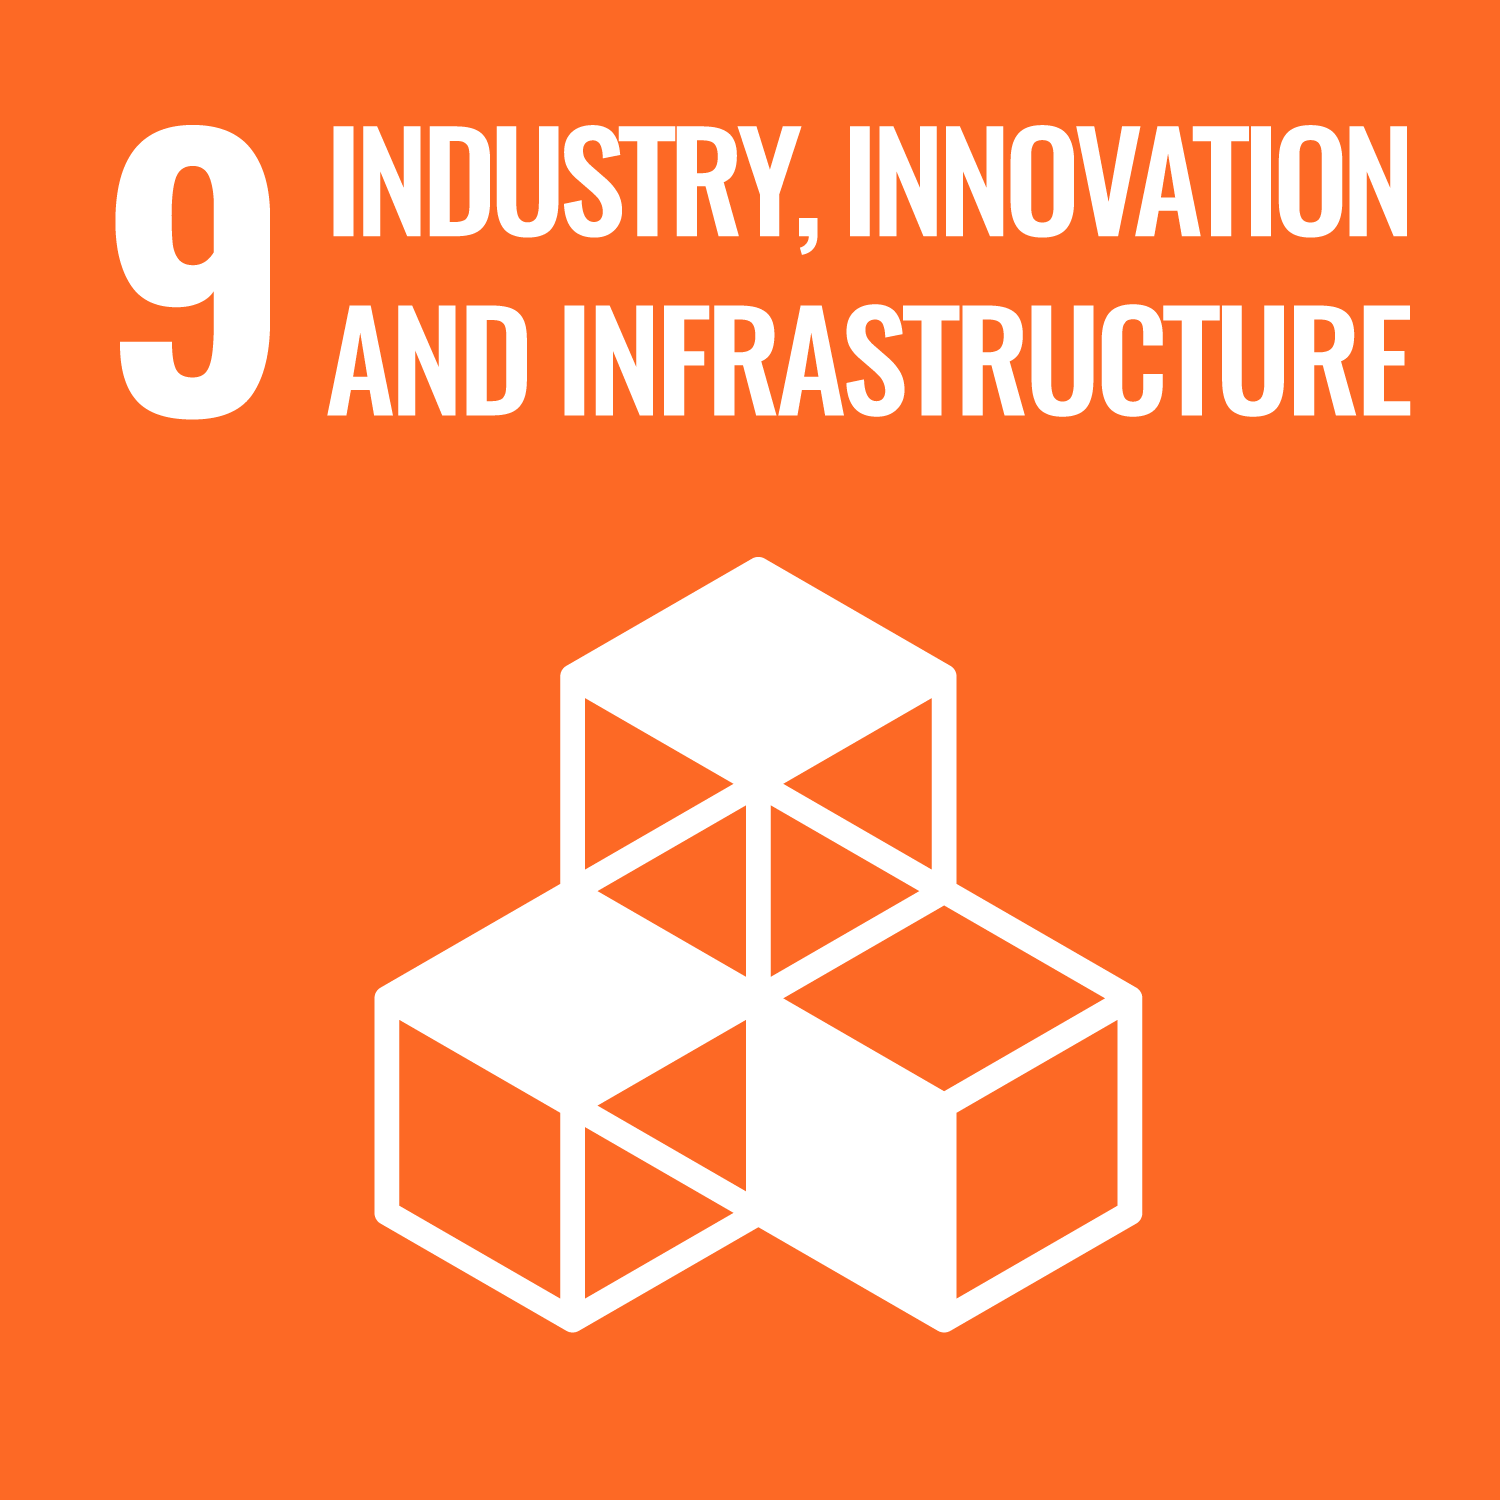 9.Industry, innovation, infrastructure